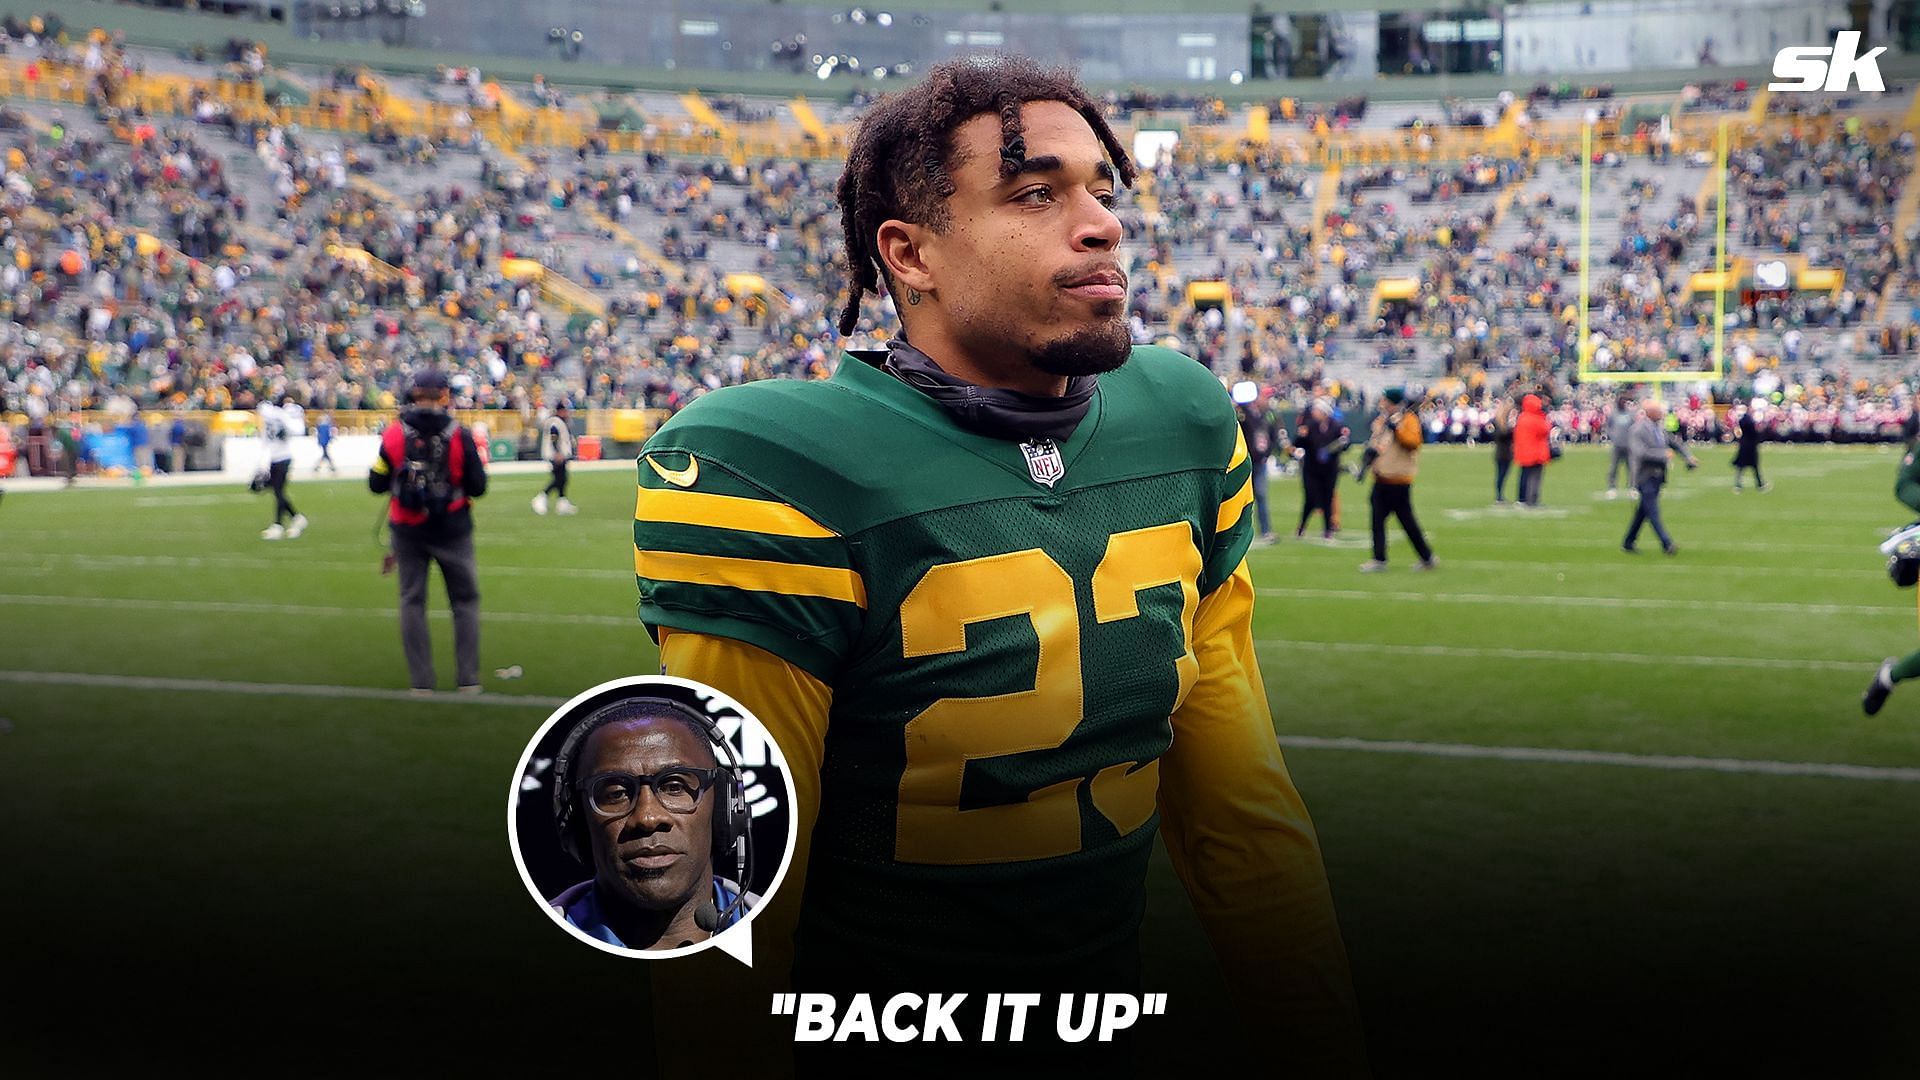 Shannon Sharpe responded to Jaire Alexander calling him out